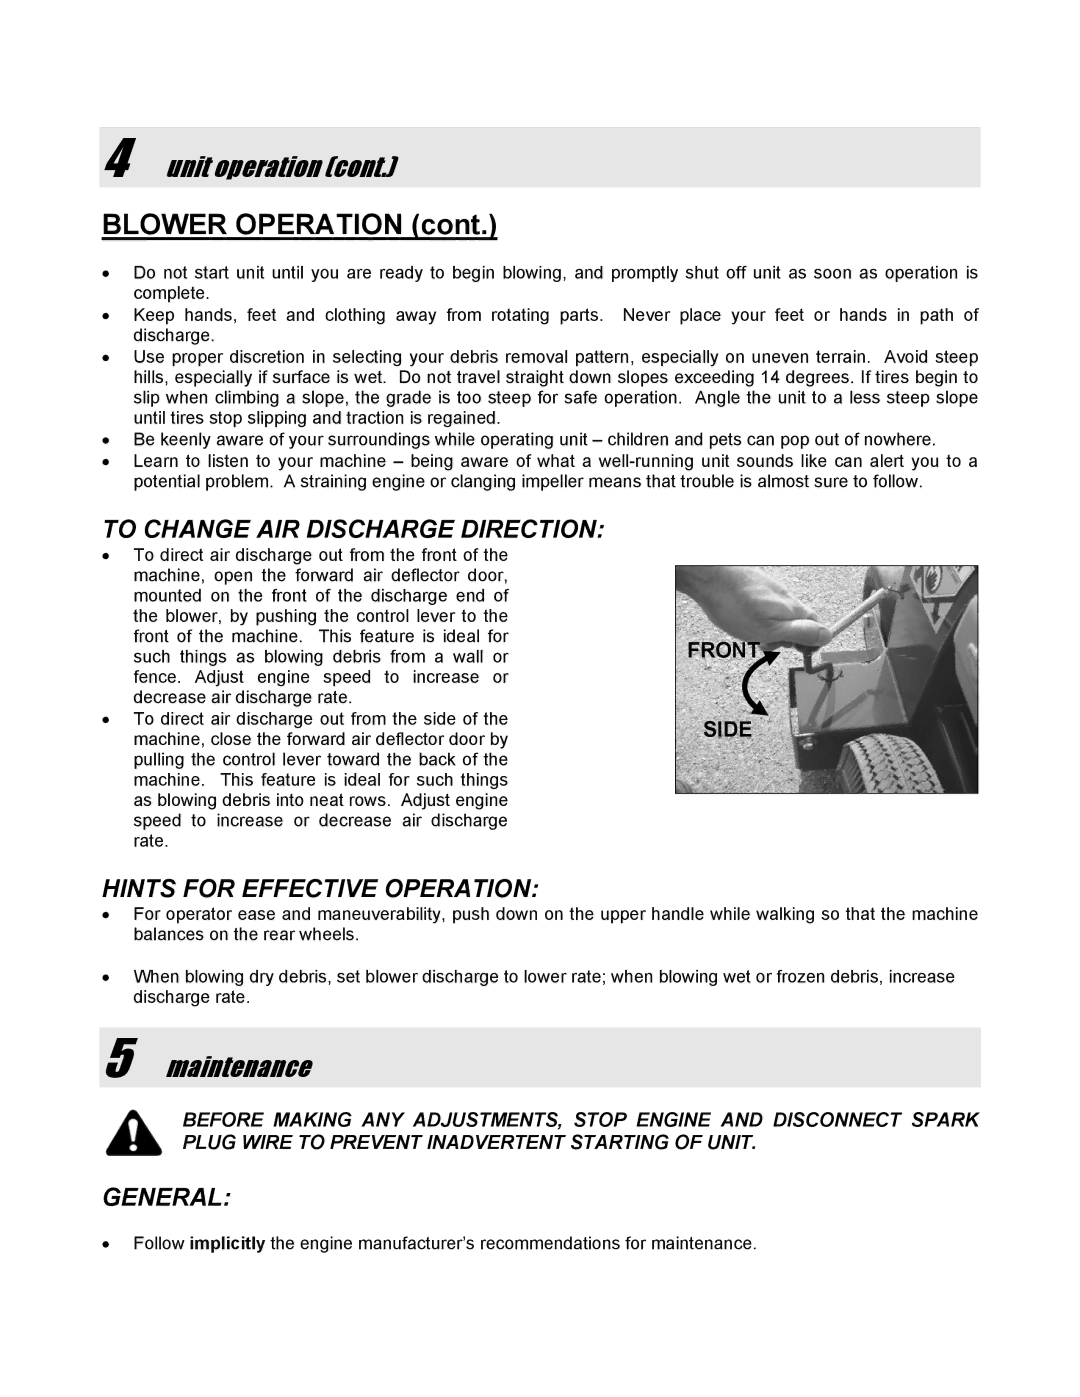 Snapper SLB55150BV manual Maintenance, To Change AIR Discharge Direction, Hints for Effective Operation, General 